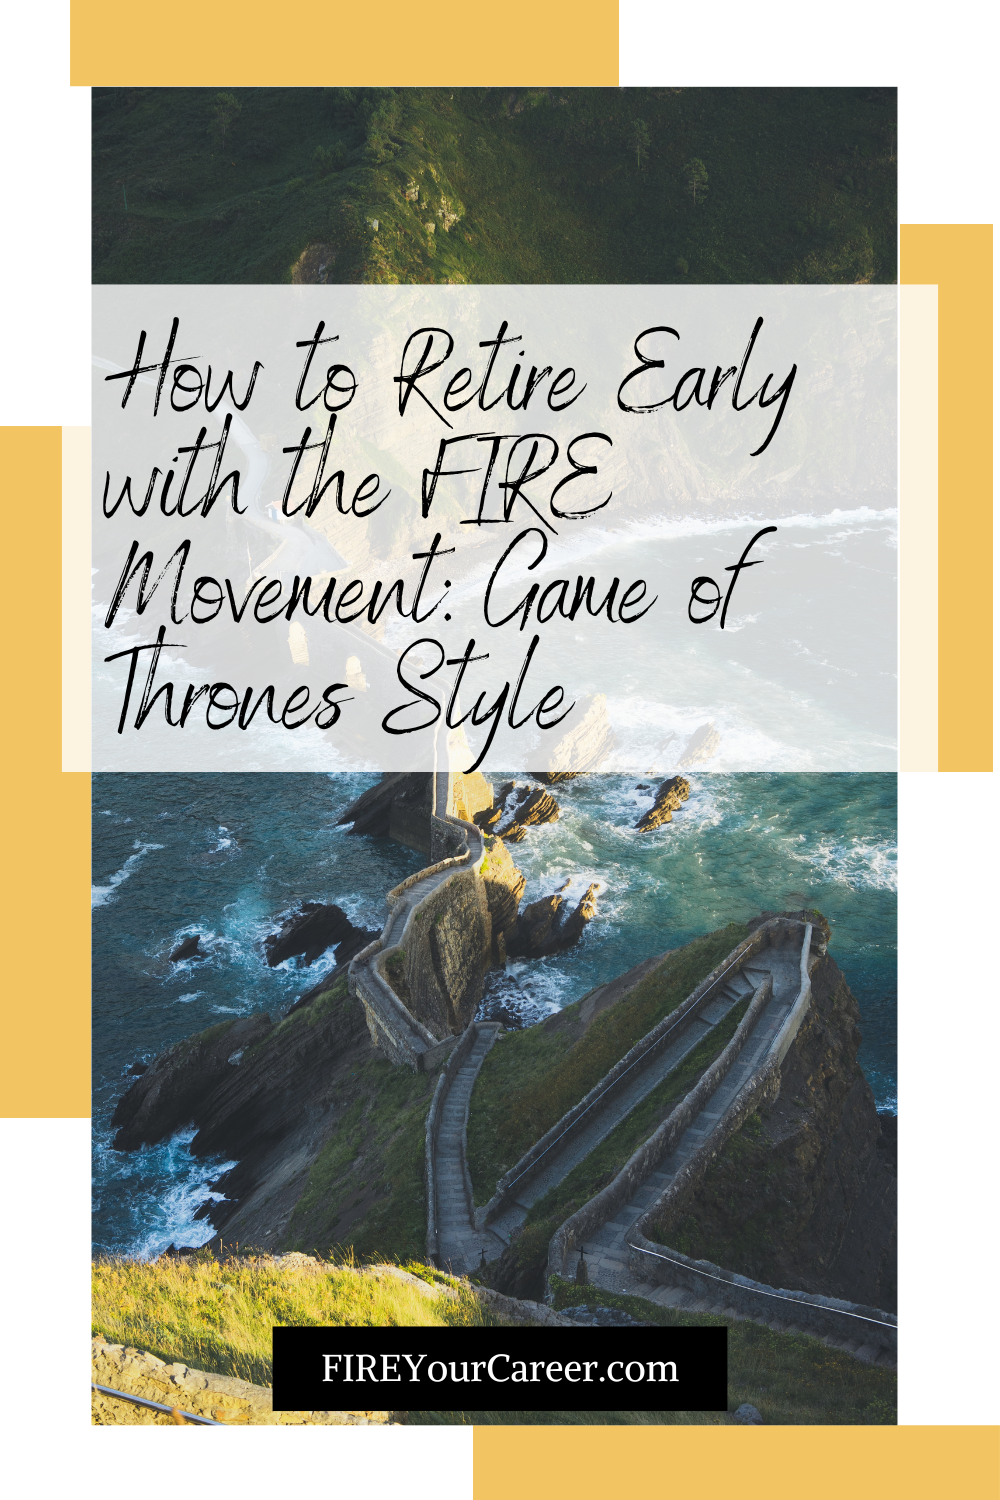 How to Retire Early with the FIRE Movement Game of Thrones Style Pinterest